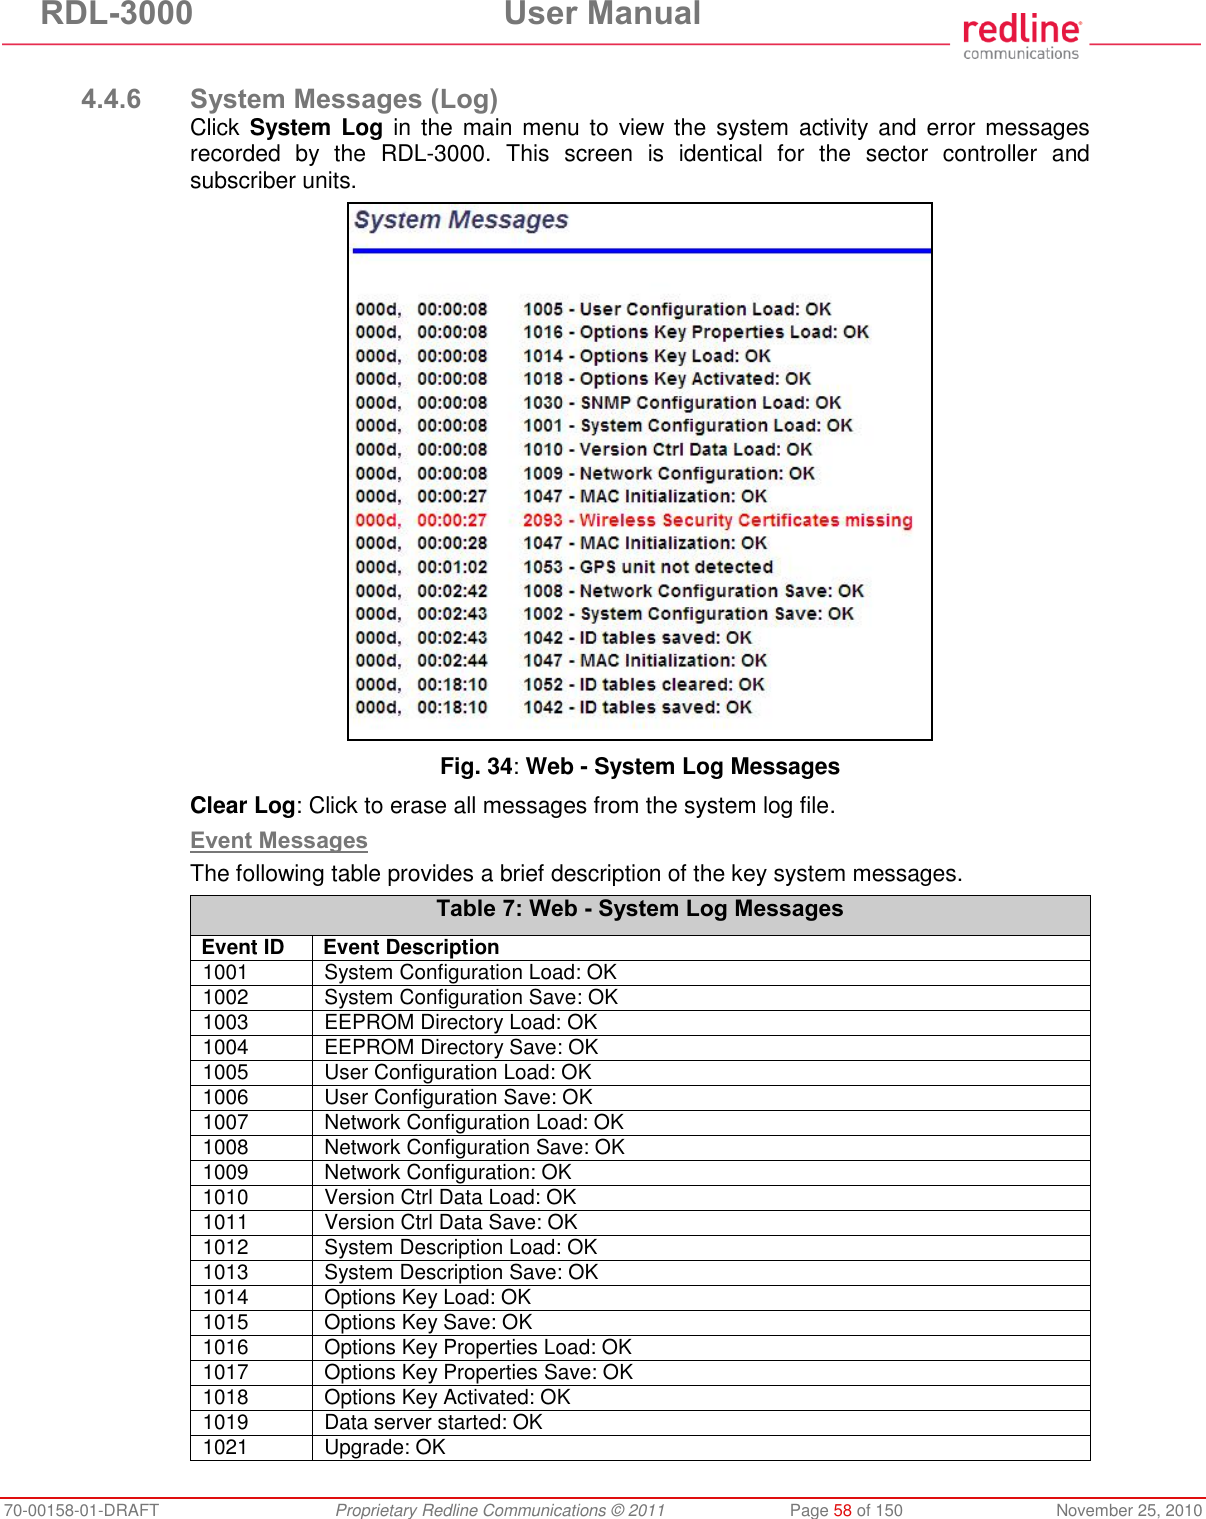 RDL-3000  User Manual 70-00158-01-DRAFT  Proprietary Redline Communications © 2011  Page 58 of 150  November 25, 2010  4.4.6 System Messages (Log) Click System Log  in  the main menu to  view the  system  activity  and  error  messages recorded  by  the  RDL-3000.  This  screen  is  identical  for  the  sector  controller  and subscriber units.   Fig. 34: Web - System Log Messages Clear Log: Click to erase all messages from the system log file. Event Messages The following table provides a brief description of the key system messages. Table 7: Web - System Log Messages Event ID Event Description 1001  System Configuration Load: OK 1002  System Configuration Save: OK 1003  EEPROM Directory Load: OK 1004  EEPROM Directory Save: OK 1005  User Configuration Load: OK 1006  User Configuration Save: OK 1007  Network Configuration Load: OK 1008  Network Configuration Save: OK 1009  Network Configuration: OK 1010  Version Ctrl Data Load: OK 1011  Version Ctrl Data Save: OK 1012  System Description Load: OK 1013  System Description Save: OK 1014  Options Key Load: OK 1015  Options Key Save: OK 1016  Options Key Properties Load: OK 1017  Options Key Properties Save: OK 1018  Options Key Activated: OK 1019  Data server started: OK 1021  Upgrade: OK 